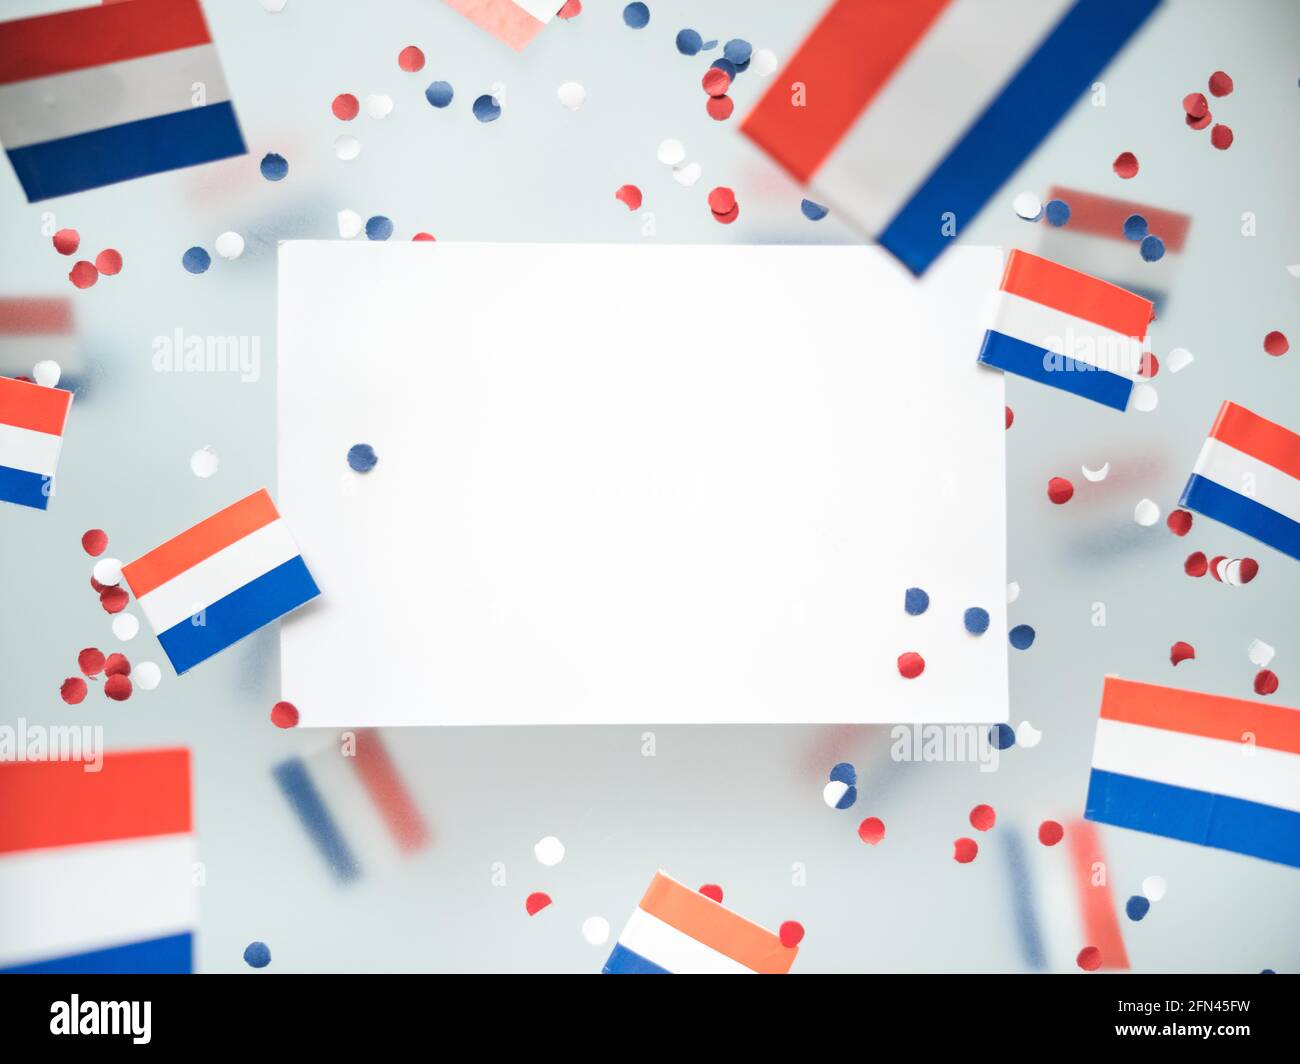 Netherlands King's birthday, liberation day. flags on a foggy background. The concept of freedom, patriotism and memory. National Unity and Solidarity Stock Photo